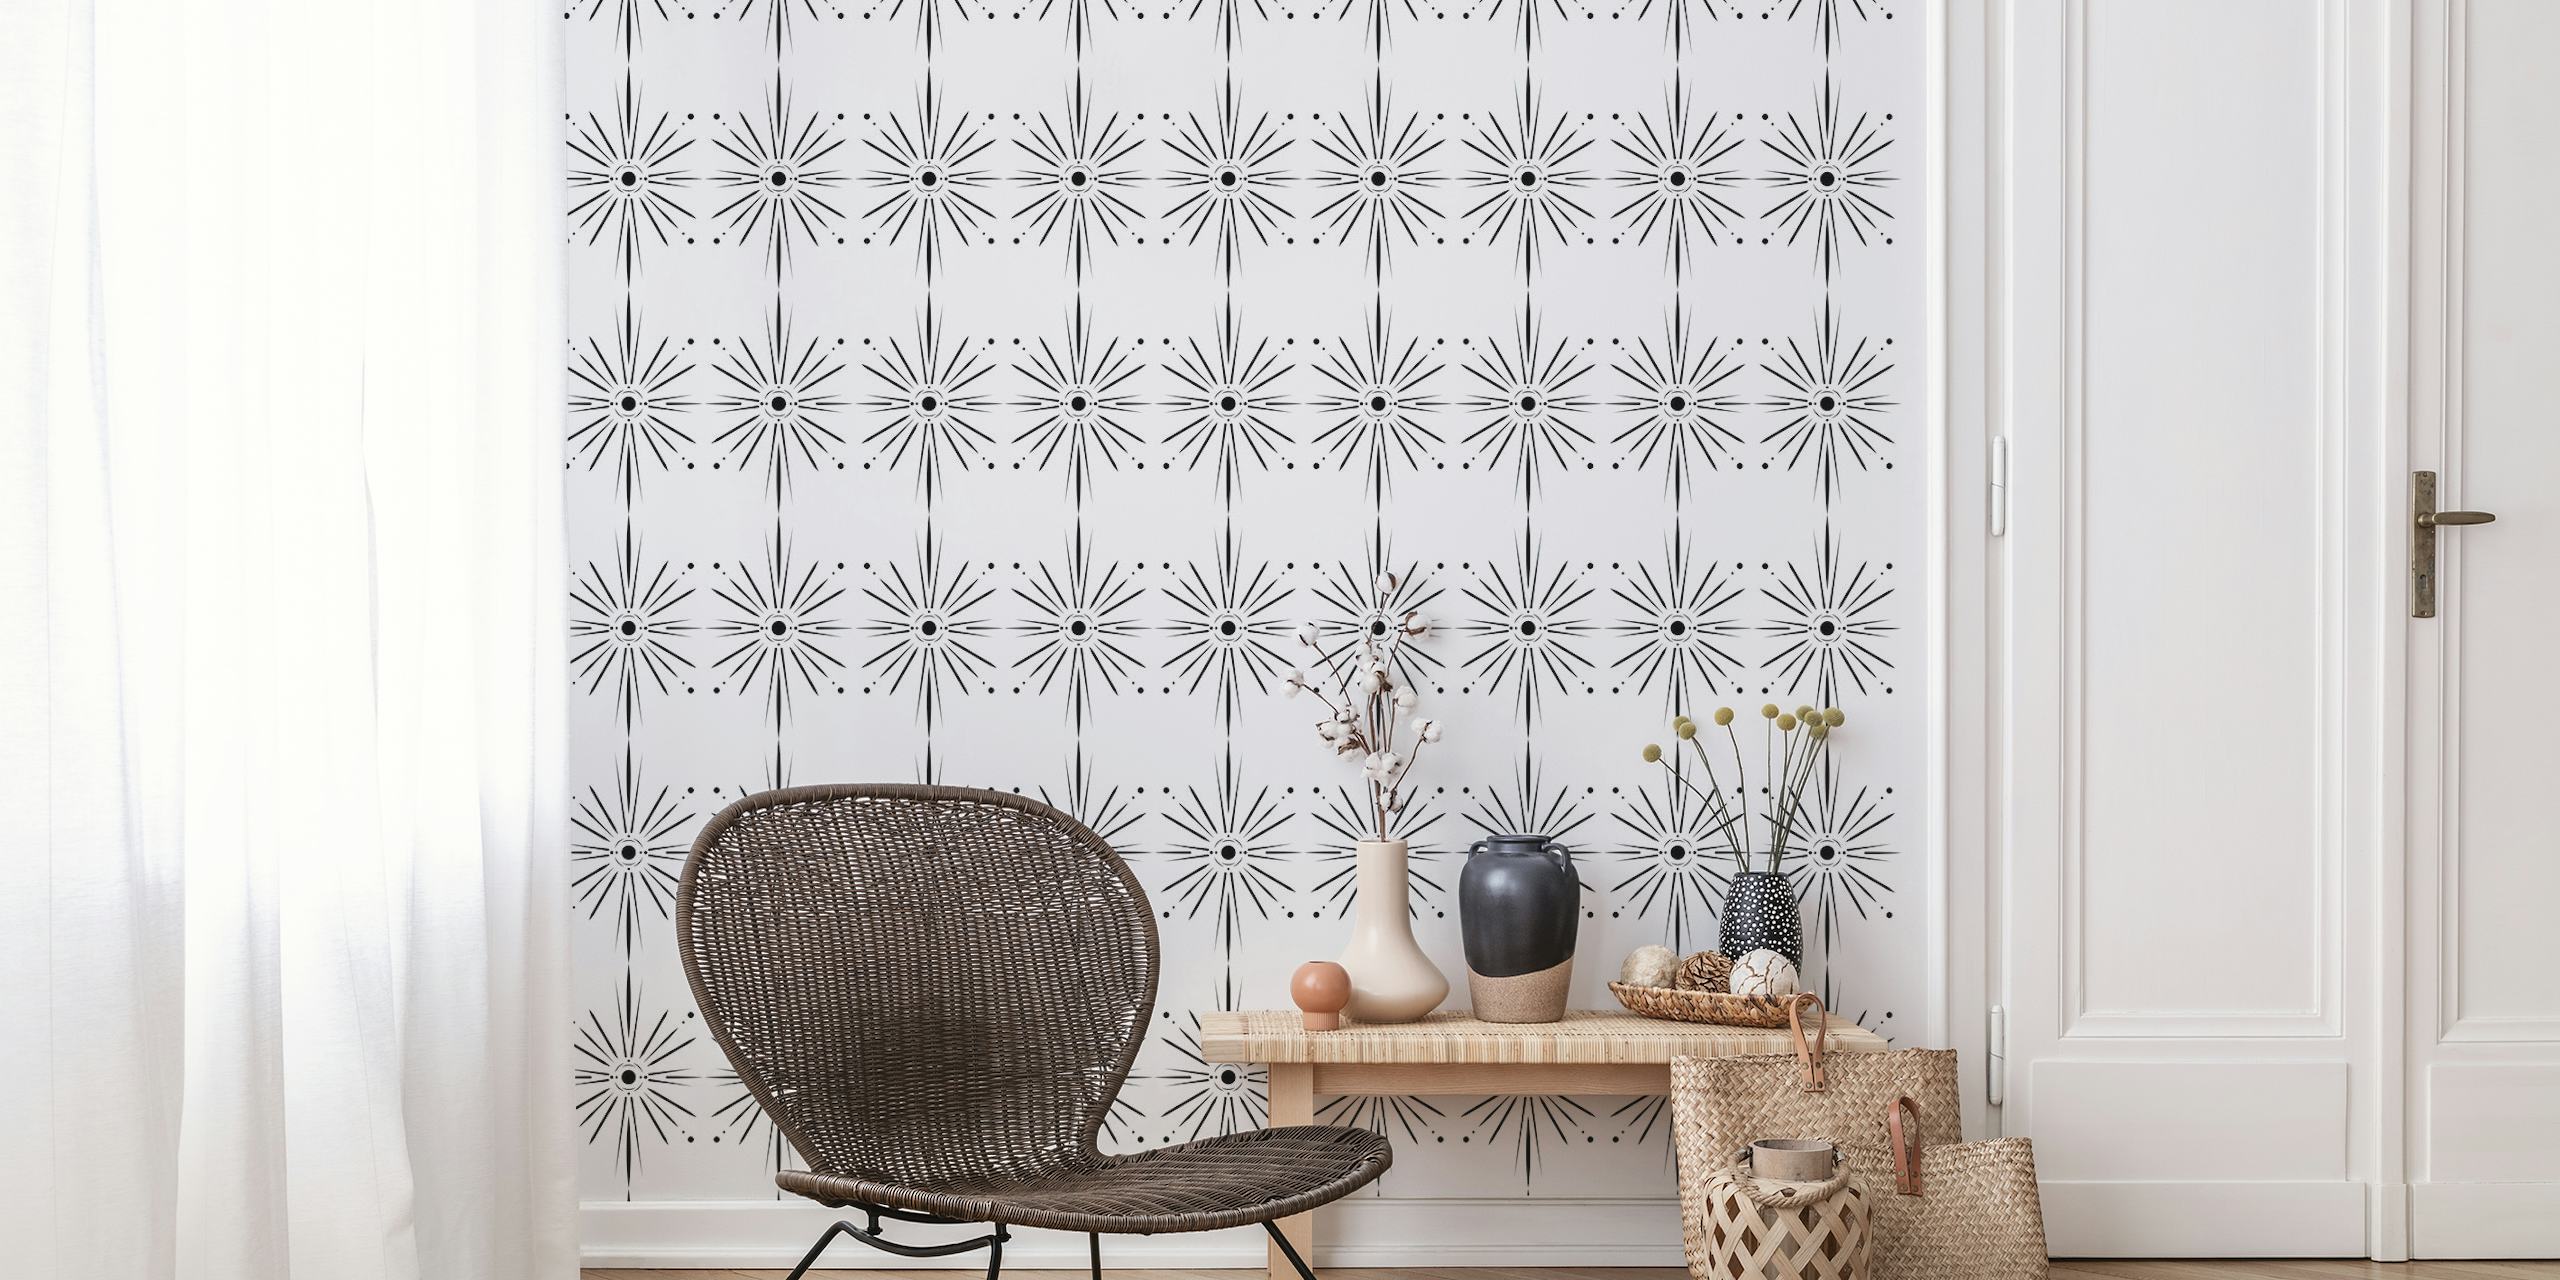 Sun Star wall mural with a pattern of intricate sun stars against a crisp white background